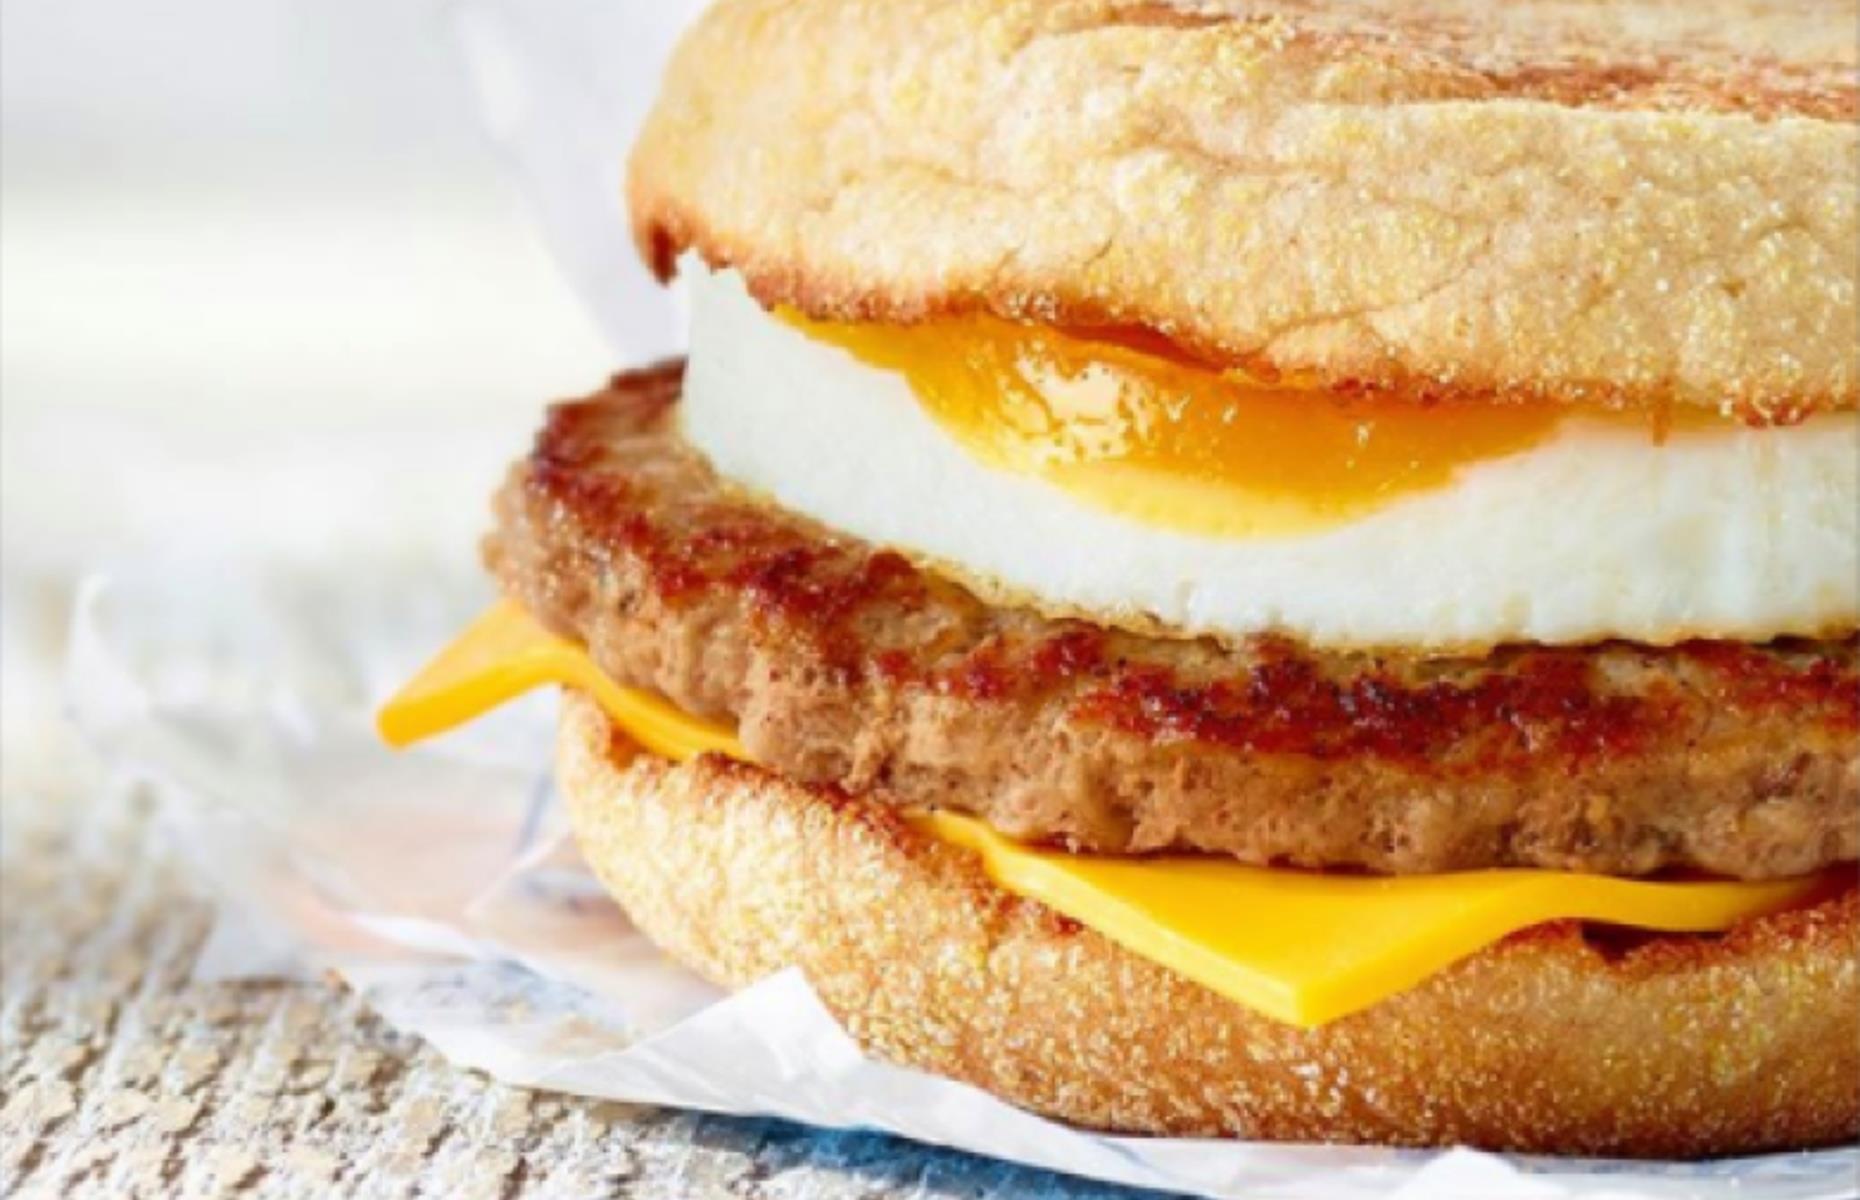 Ranked: The 23 greatest fast food breakfasts of all time